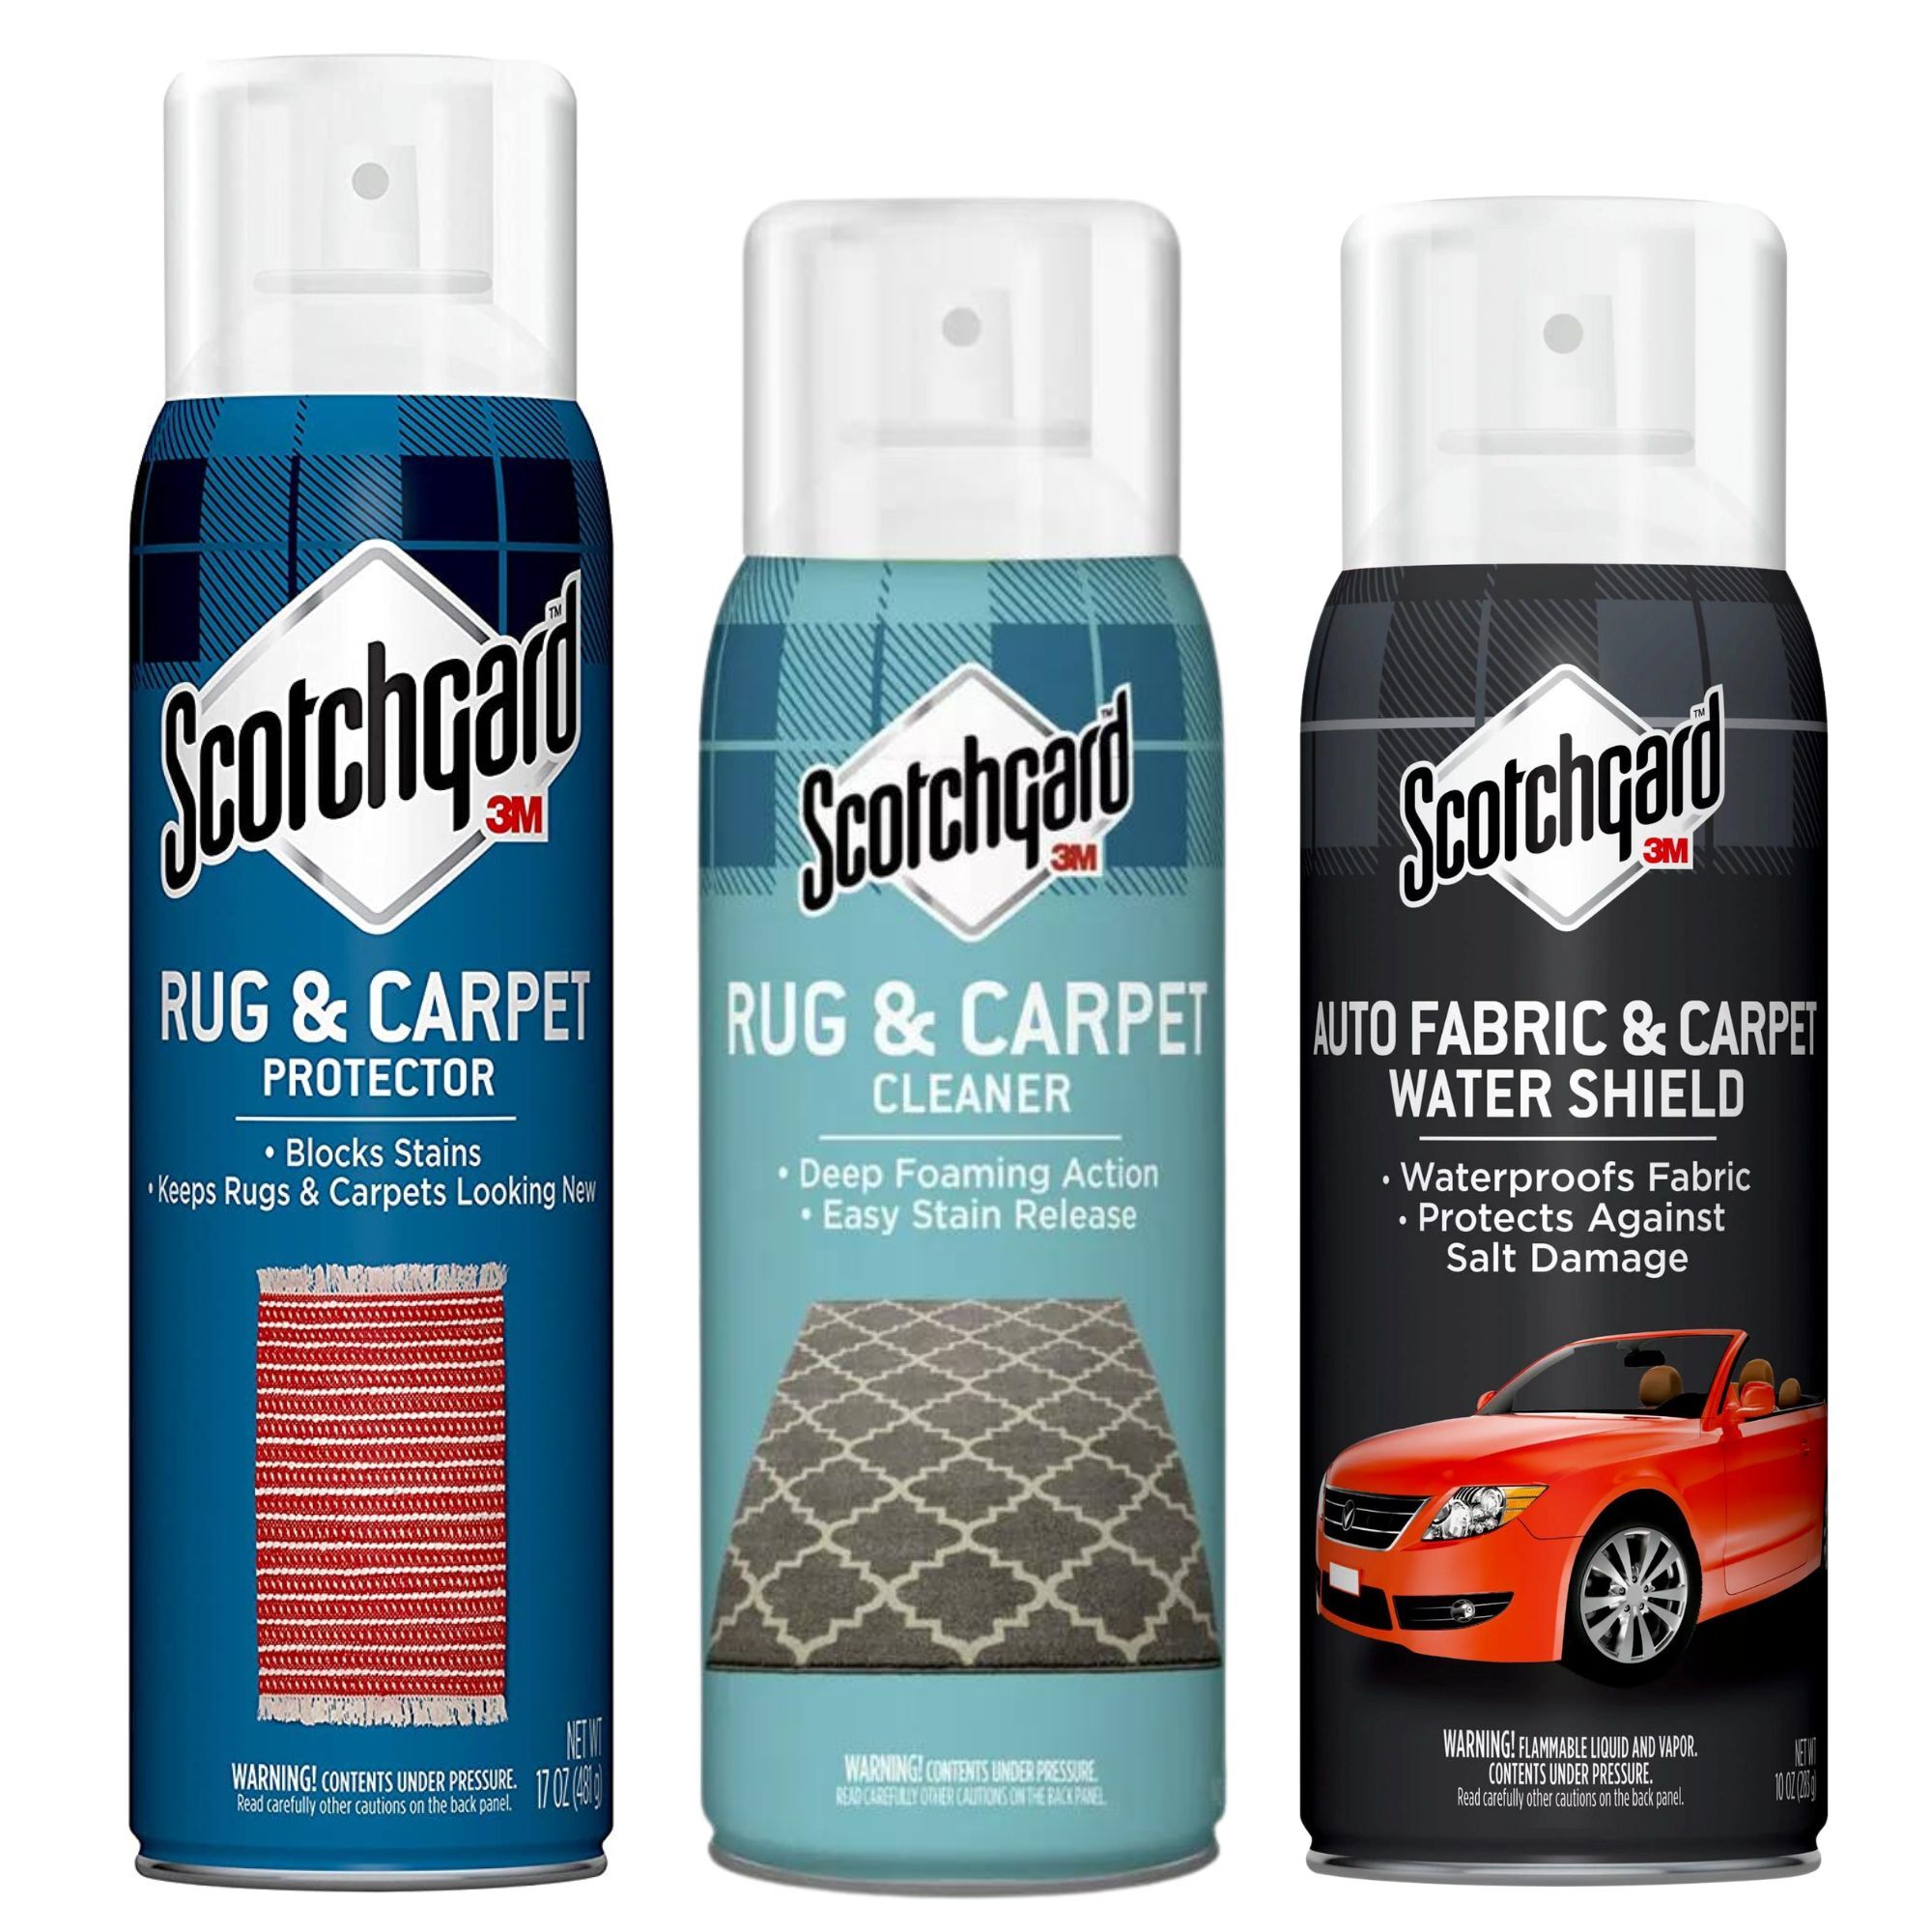 Scotchgard Rug &amp; Carpet Cleaners and Protectors